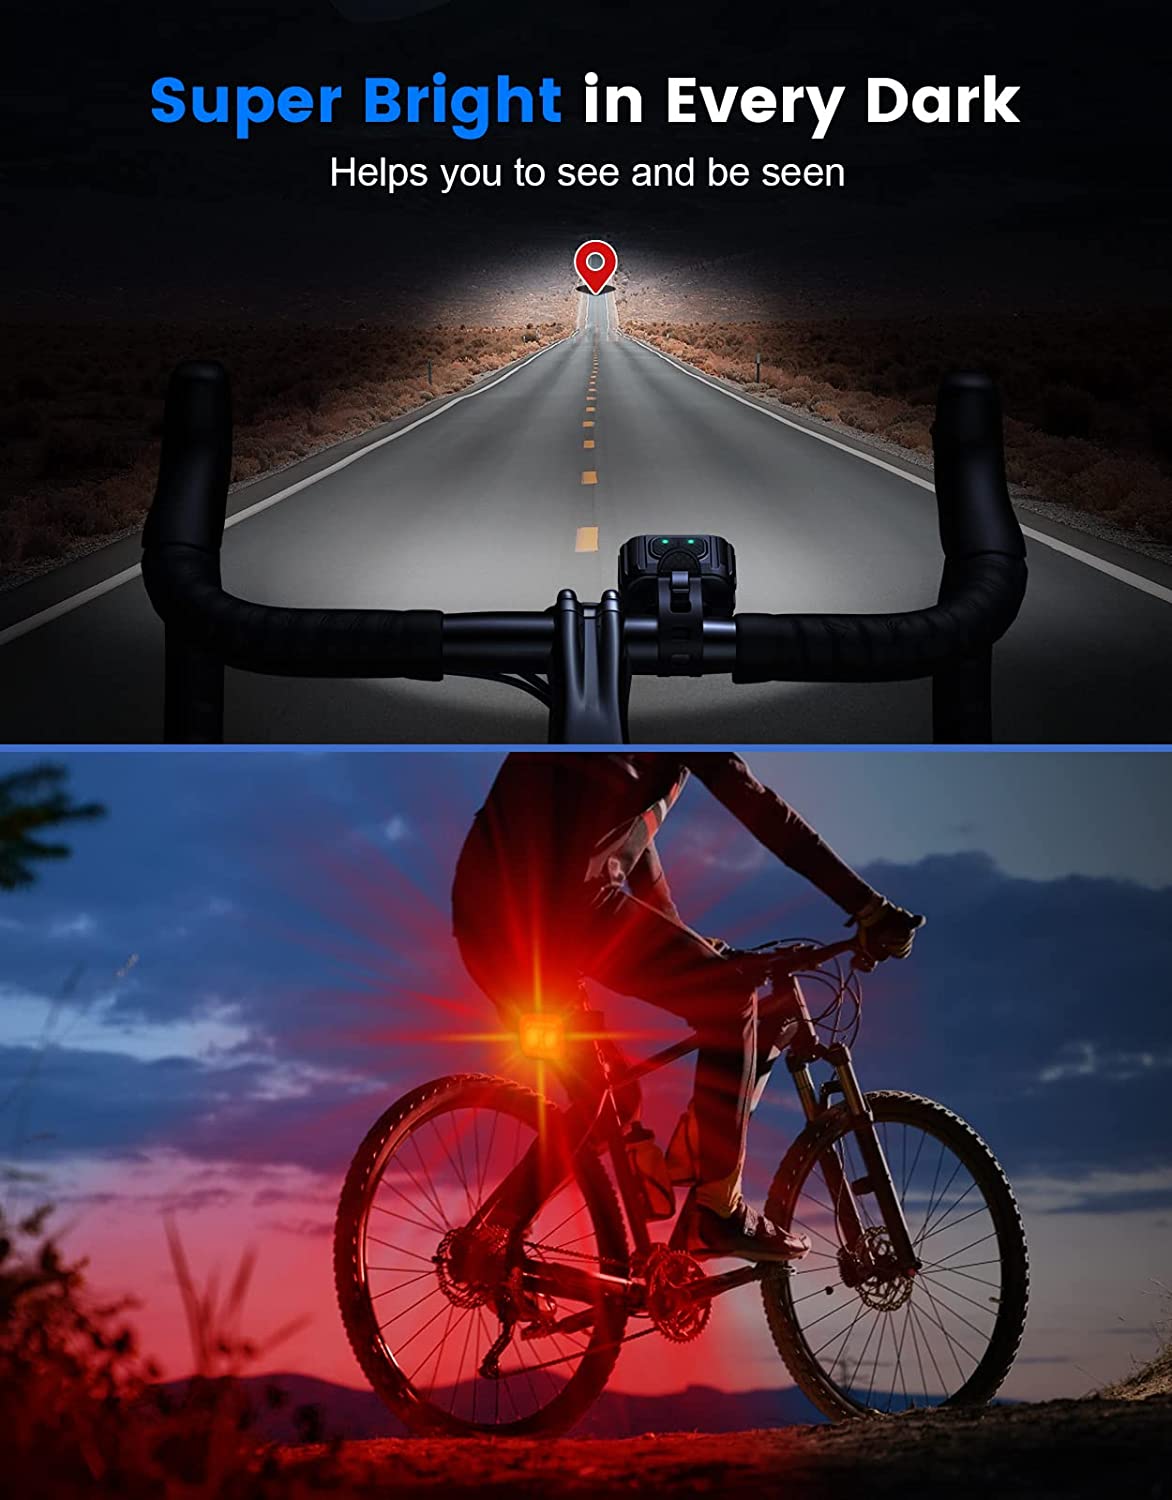 8/12 Modes IPX6 Ultra Bright Bicycle Headlight and Tail Light Set Rechargeable Bike Light Front and Back Bike Lights for Night Riding